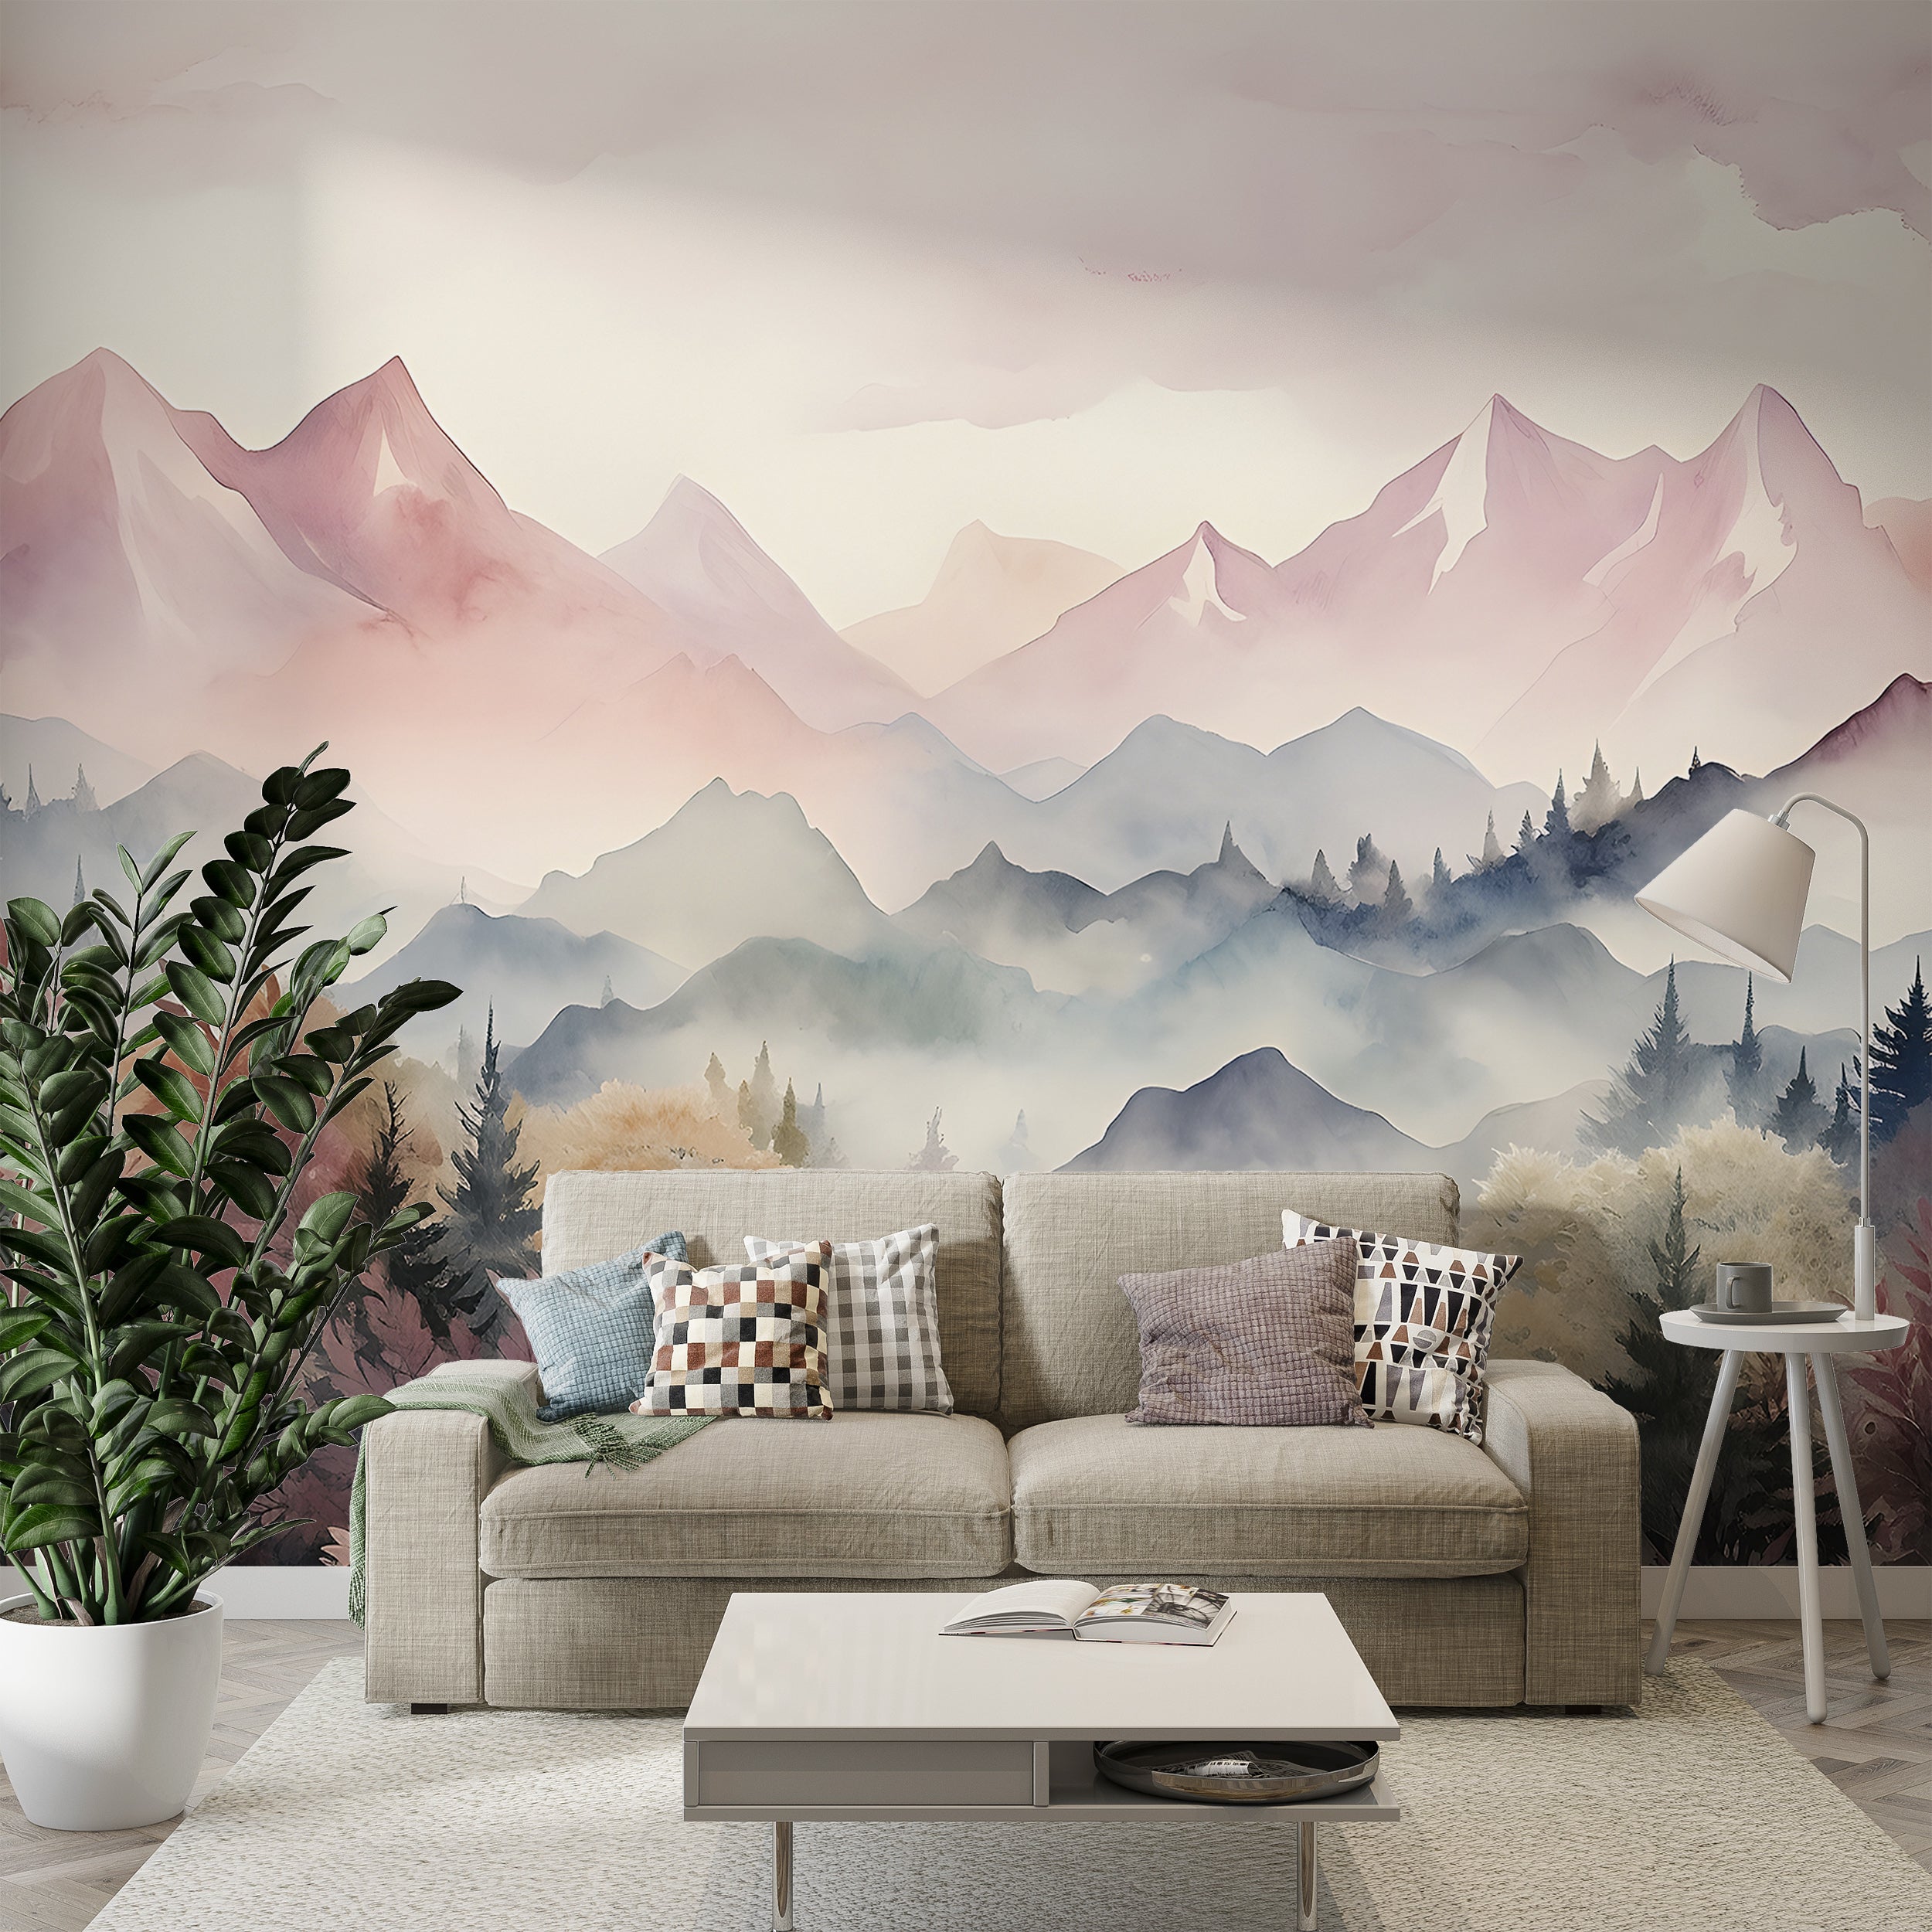 Handcrafted Watercolor Mountains and Forest Mural on Peel and Stick Material